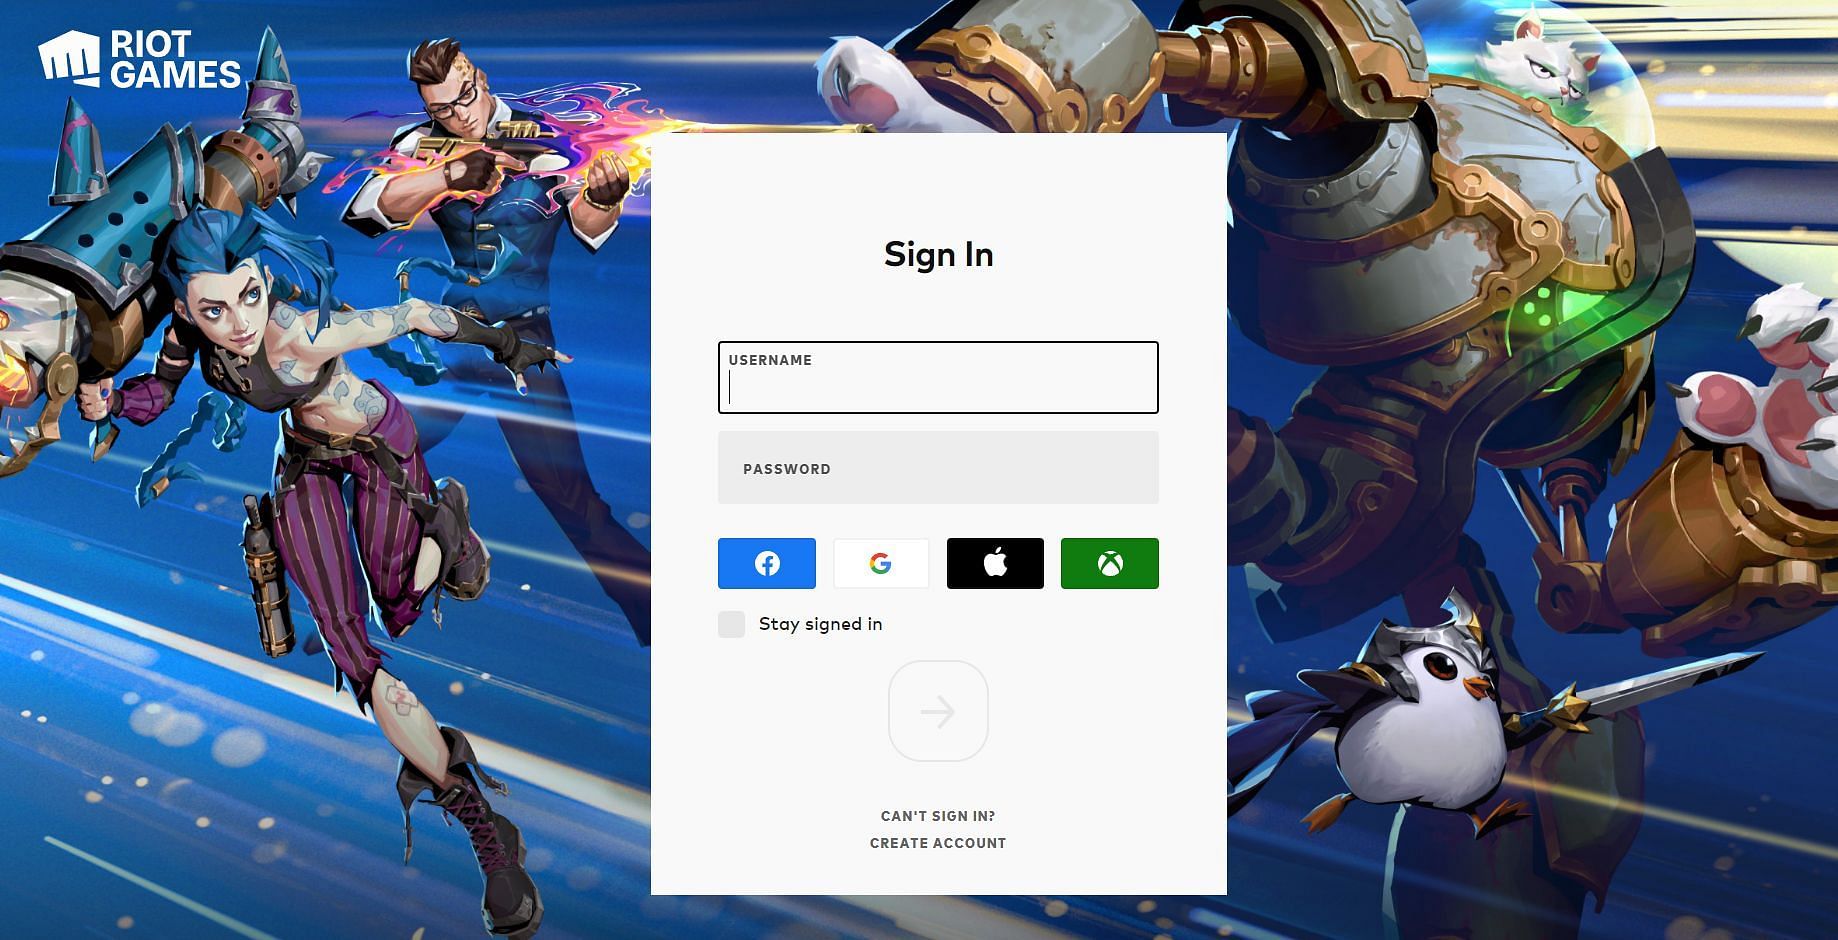 You will have to log in using your existing Riot Games account (Image via Riot Games)